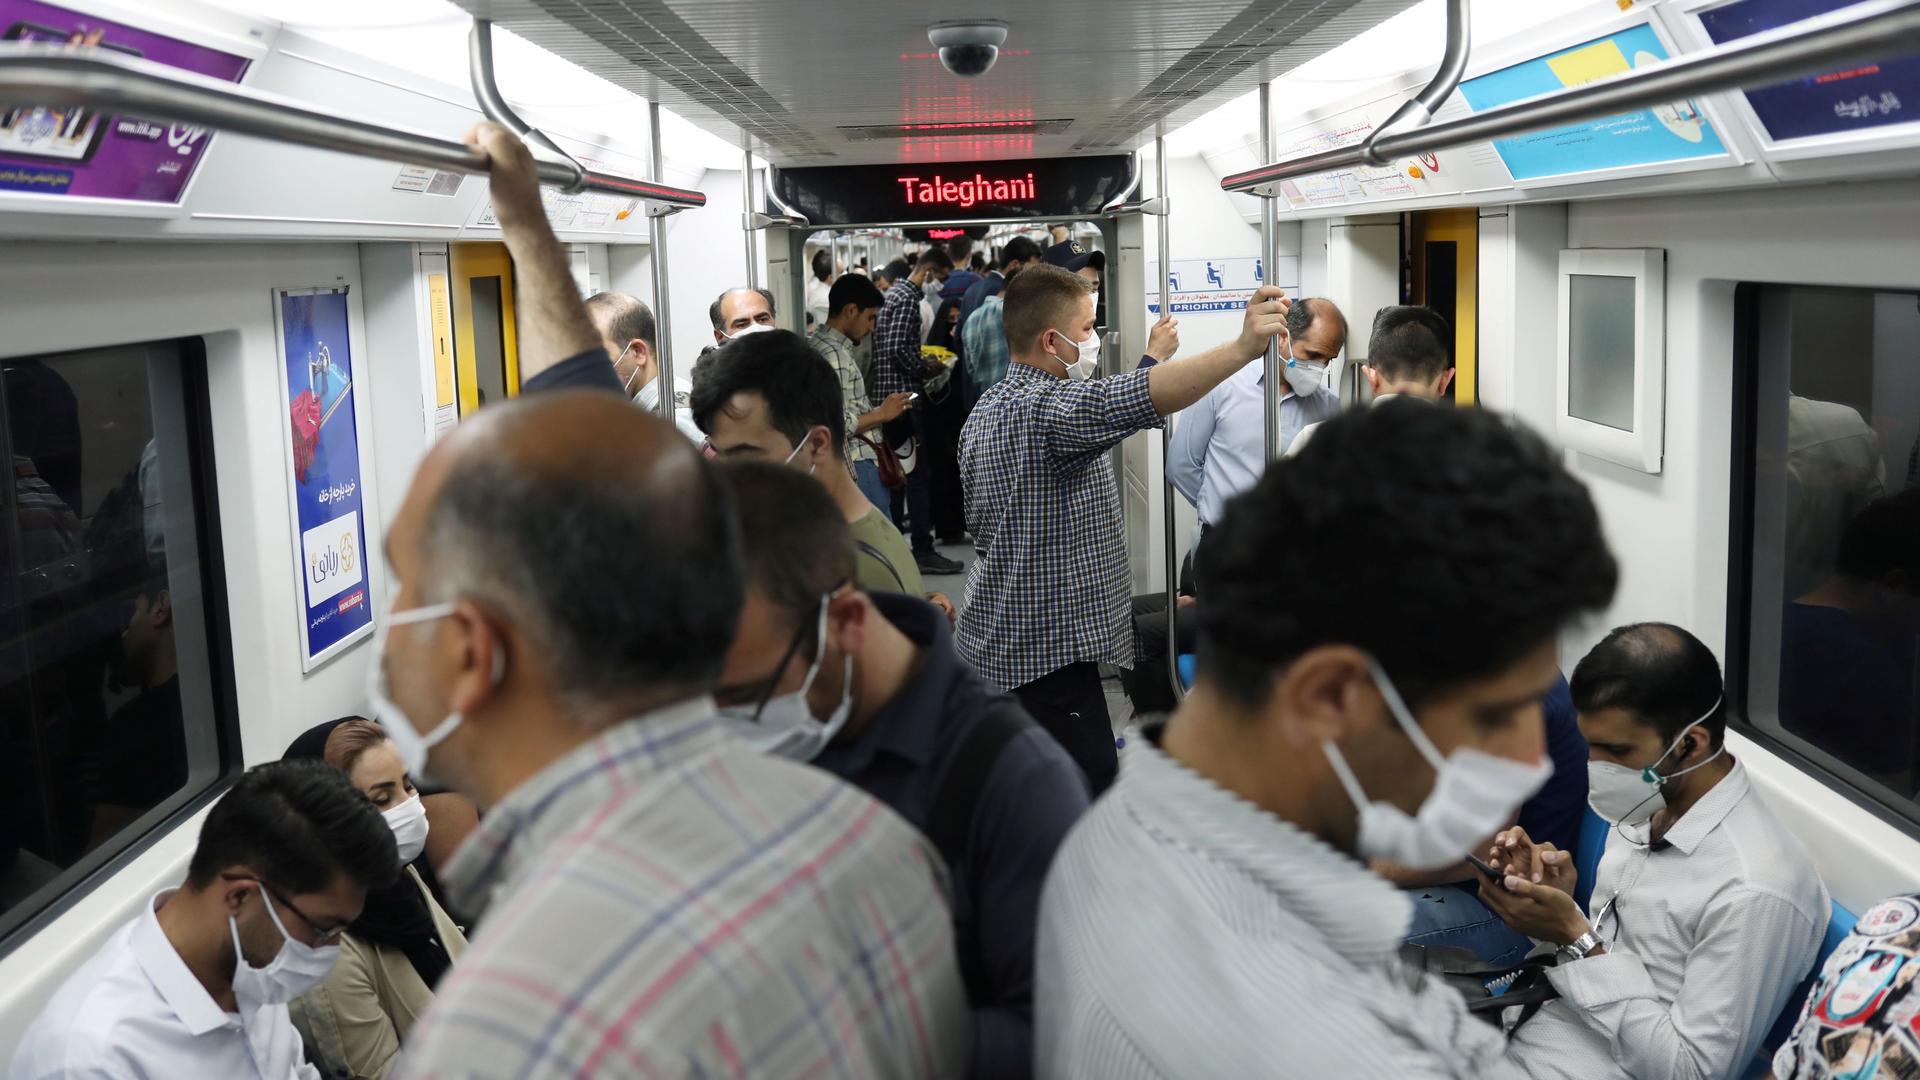 Iranians wear protective face masks while riding on the metro crowded together